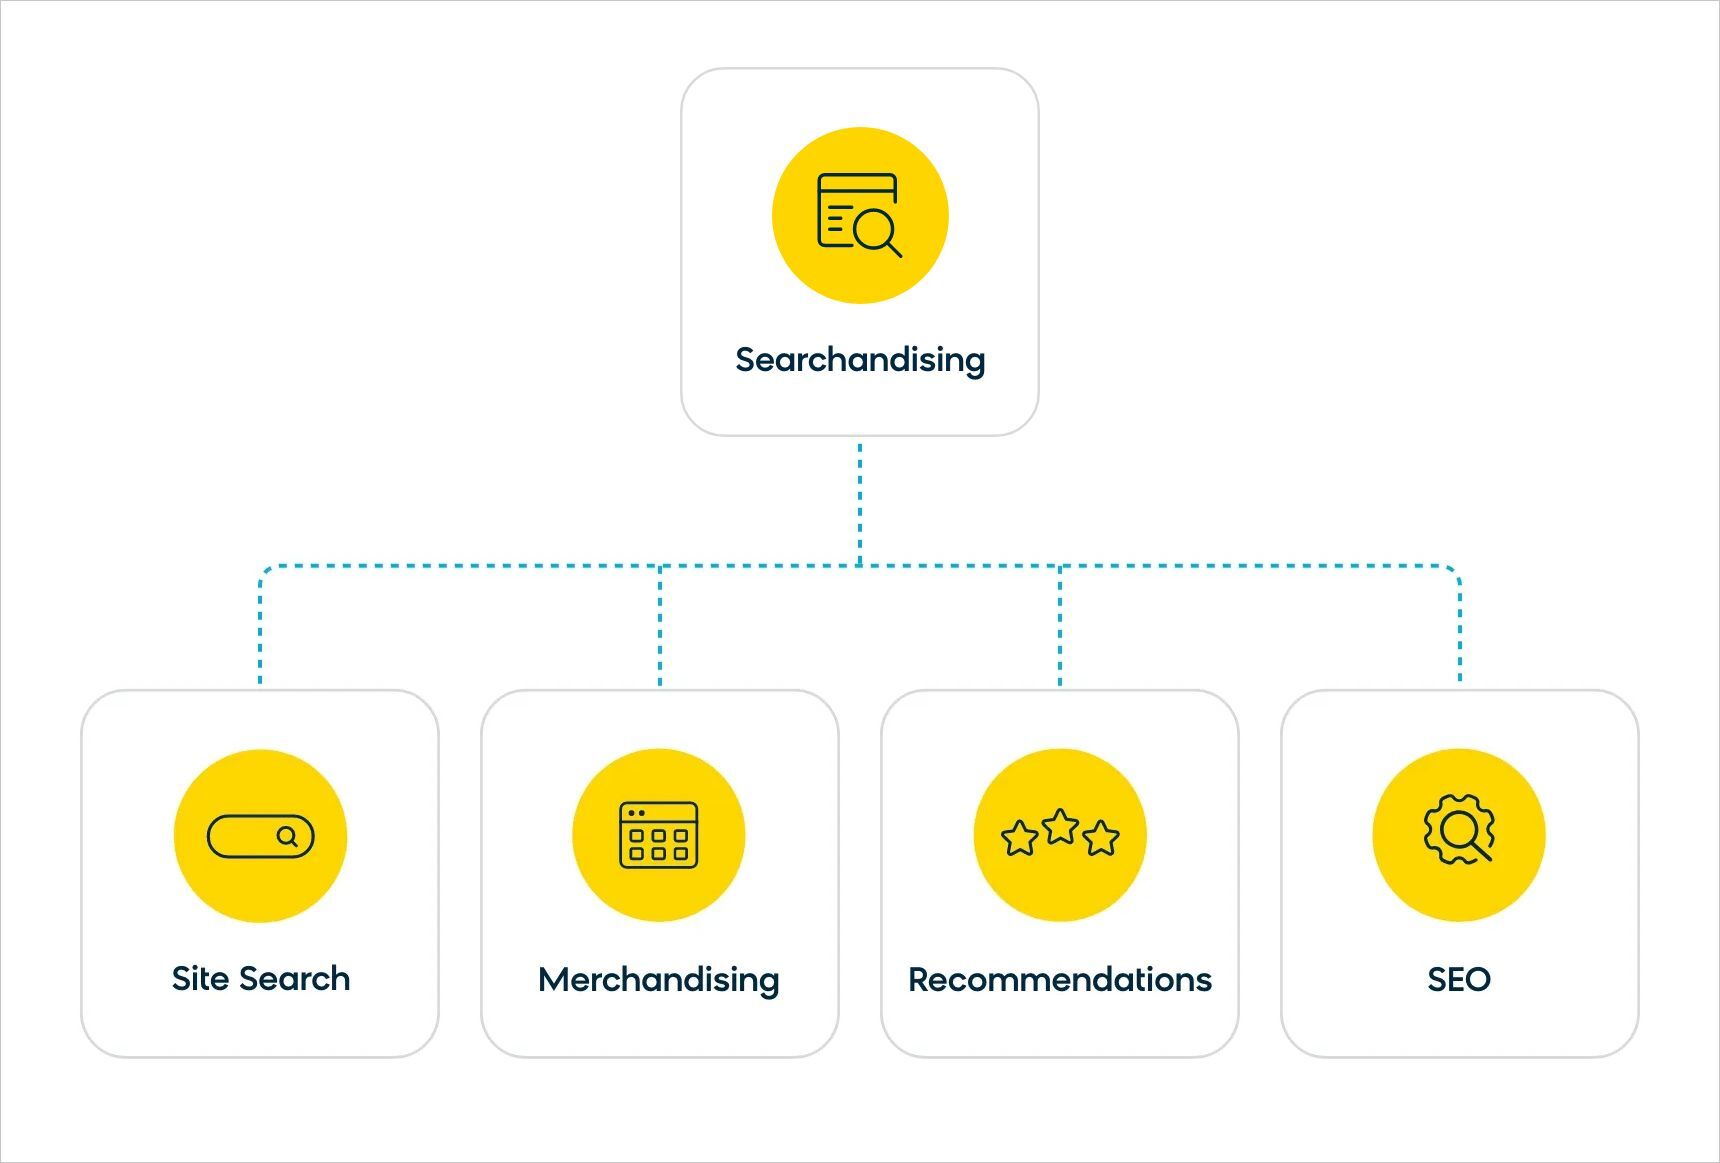 The Different Aspects of an Effective Searchandising Strategy